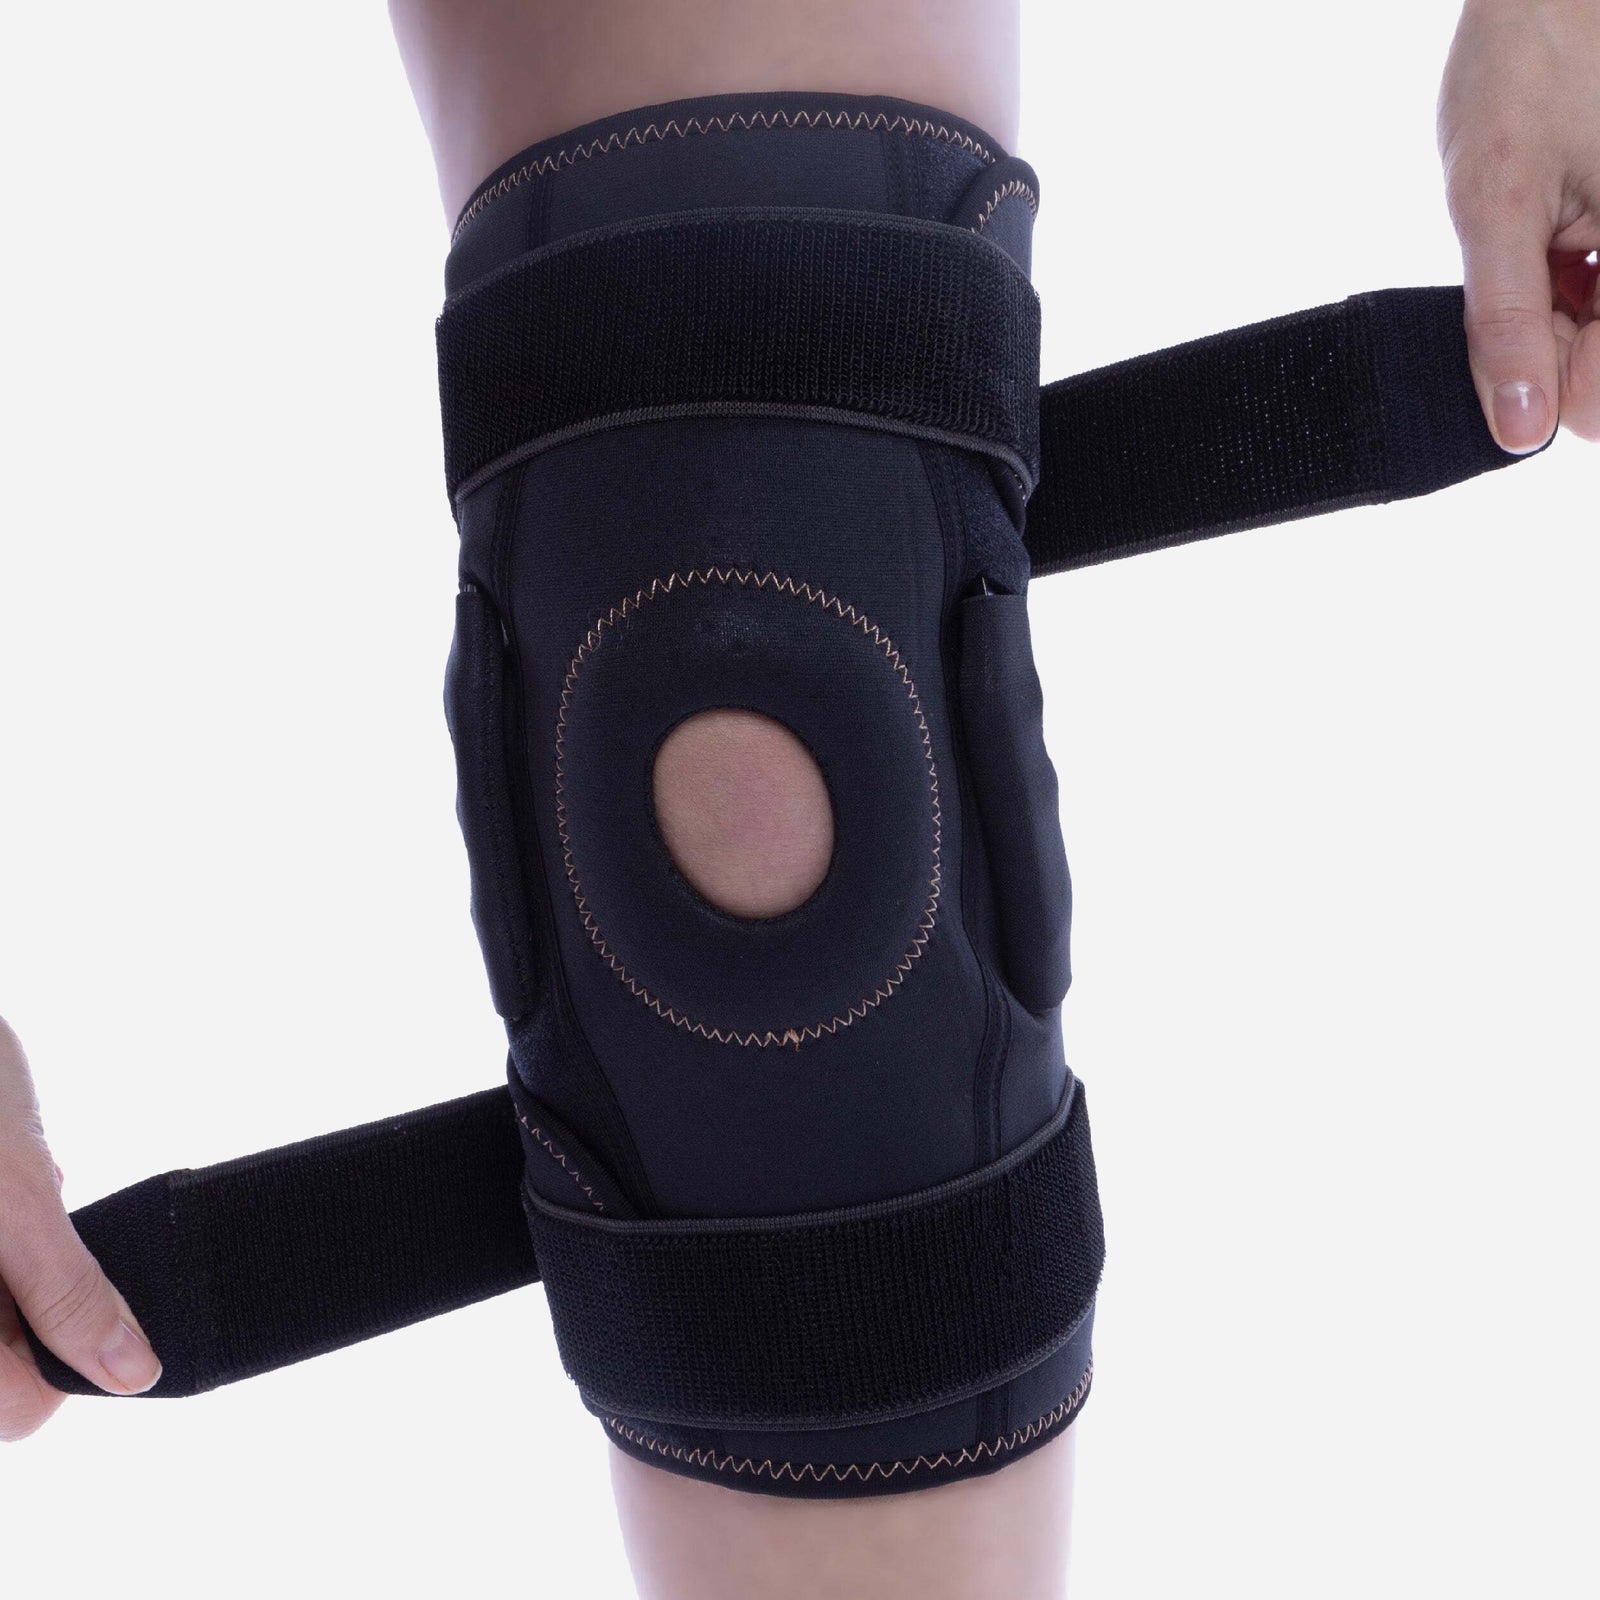 Copper Fit Knee Stabilizer - S/M